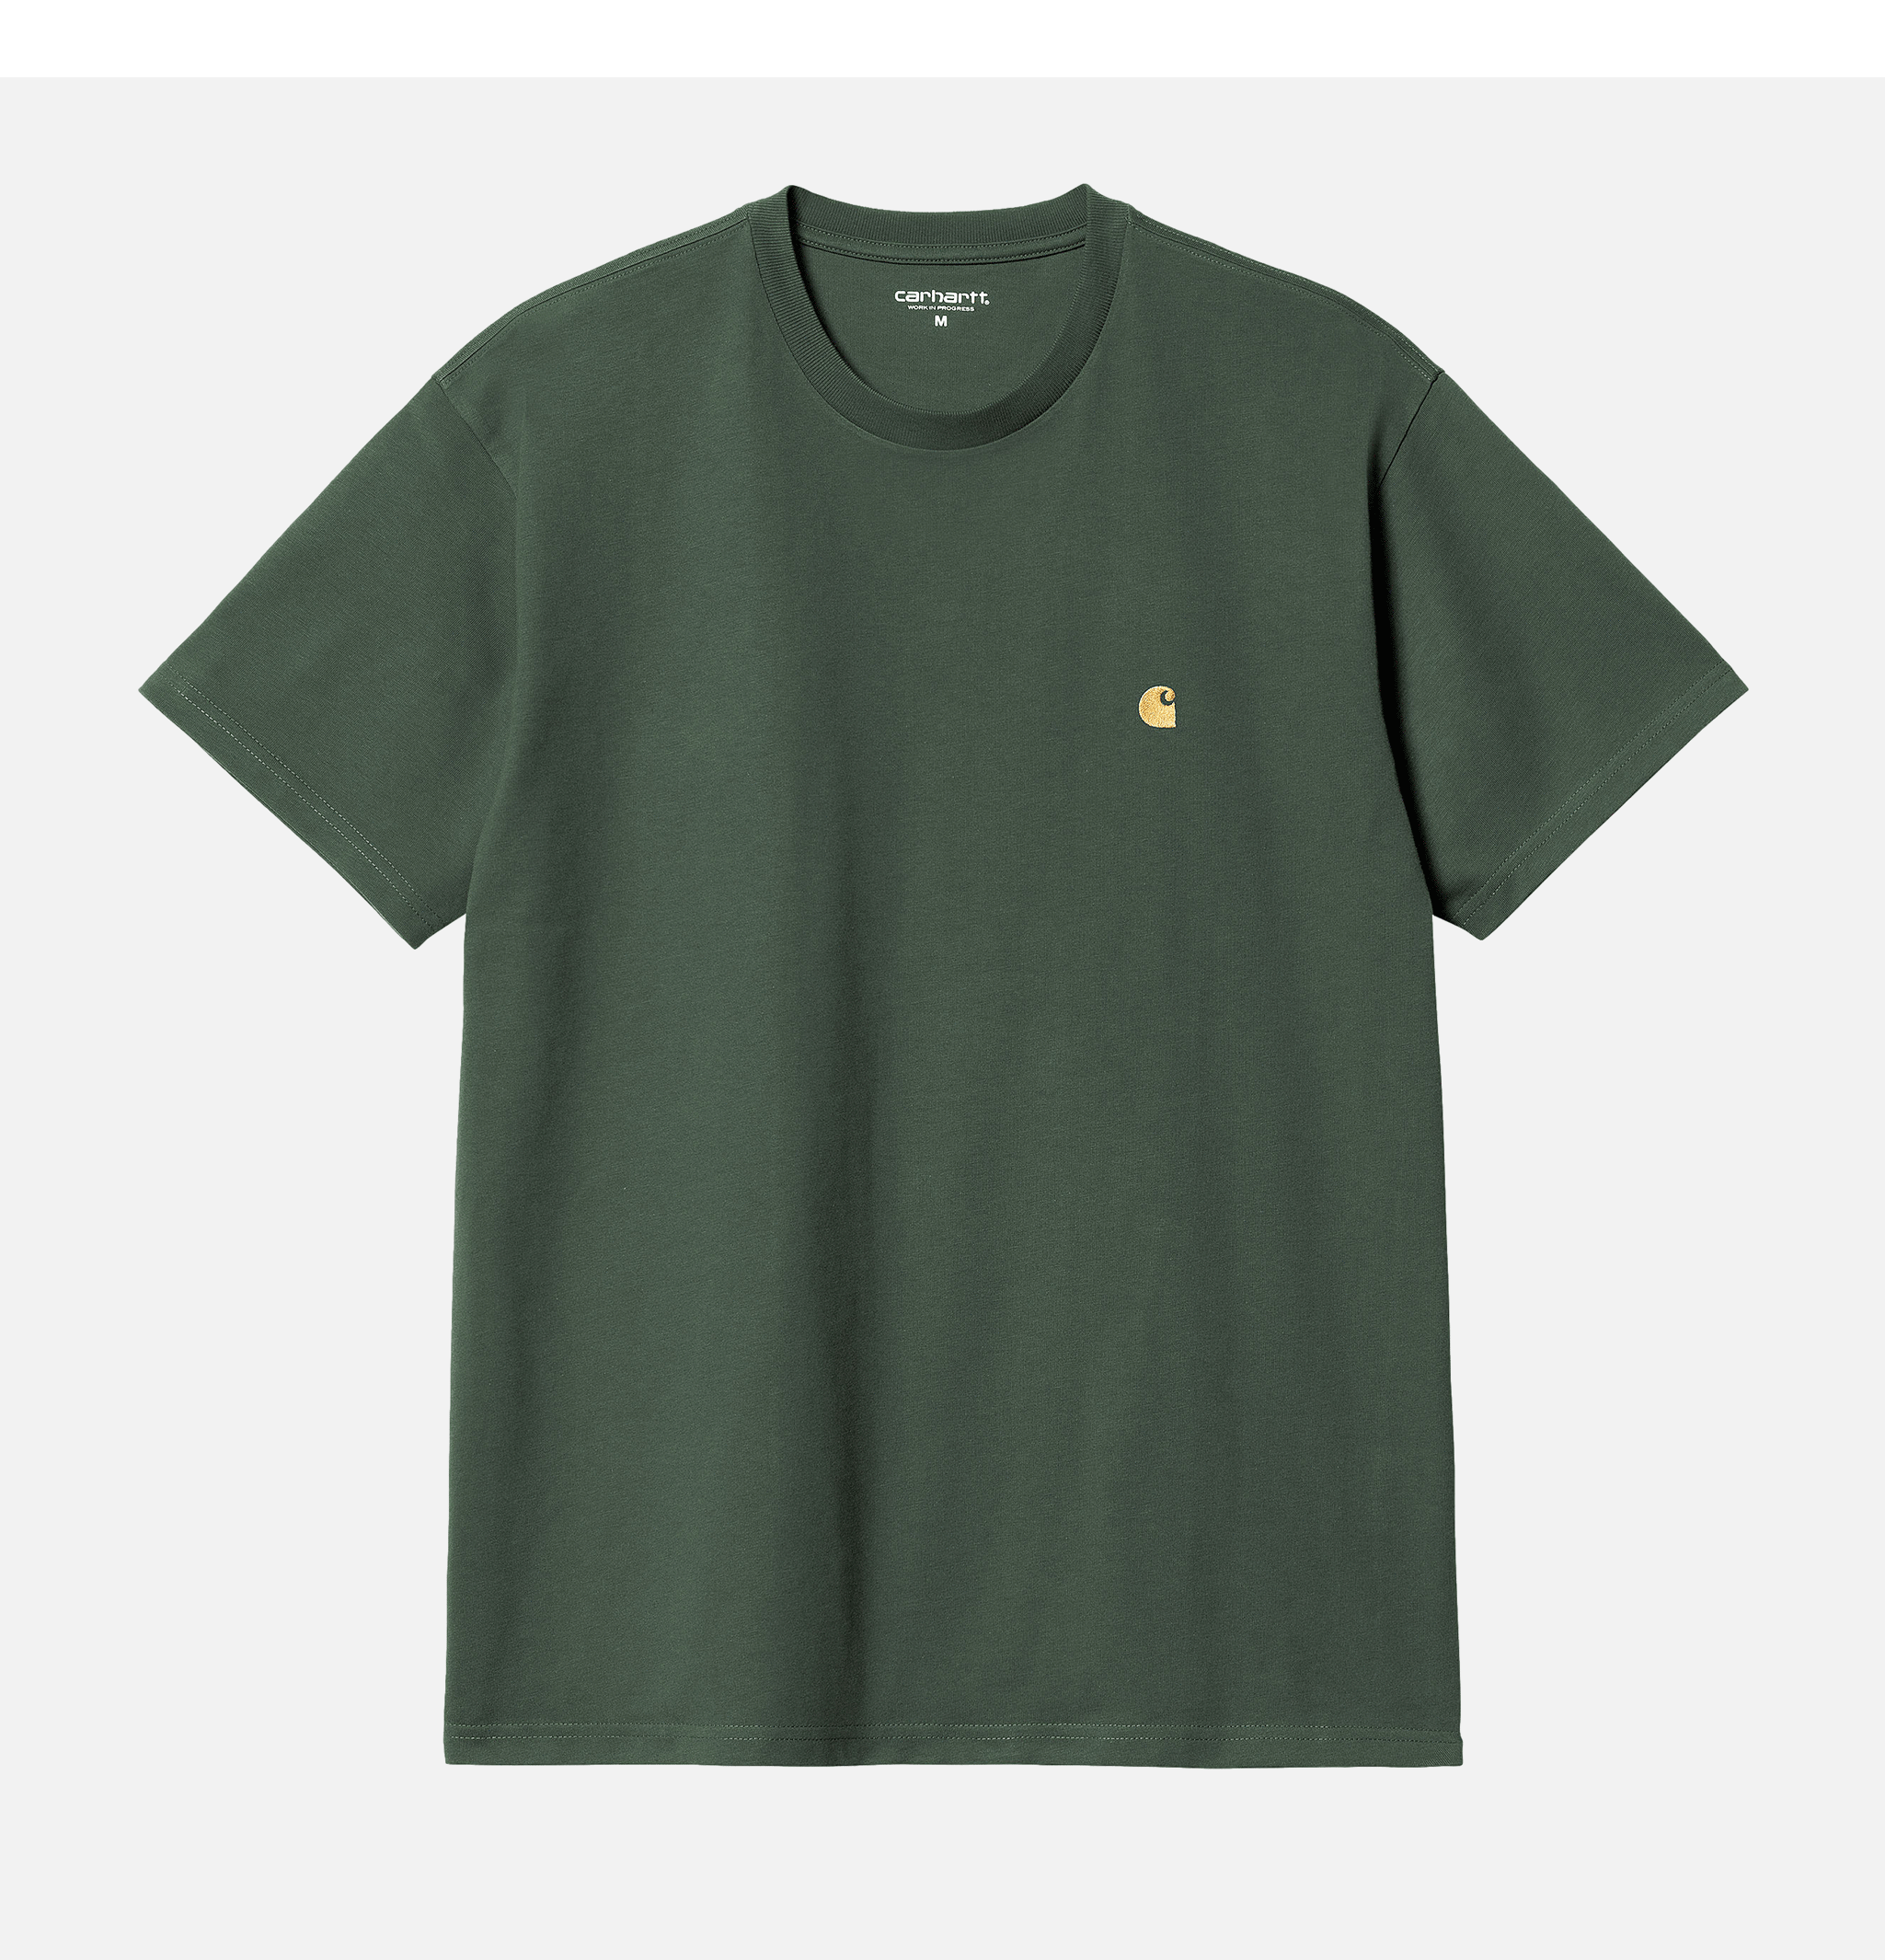 Carhartt WIP S/S Chase T-Shirt Sycamore Tree Green